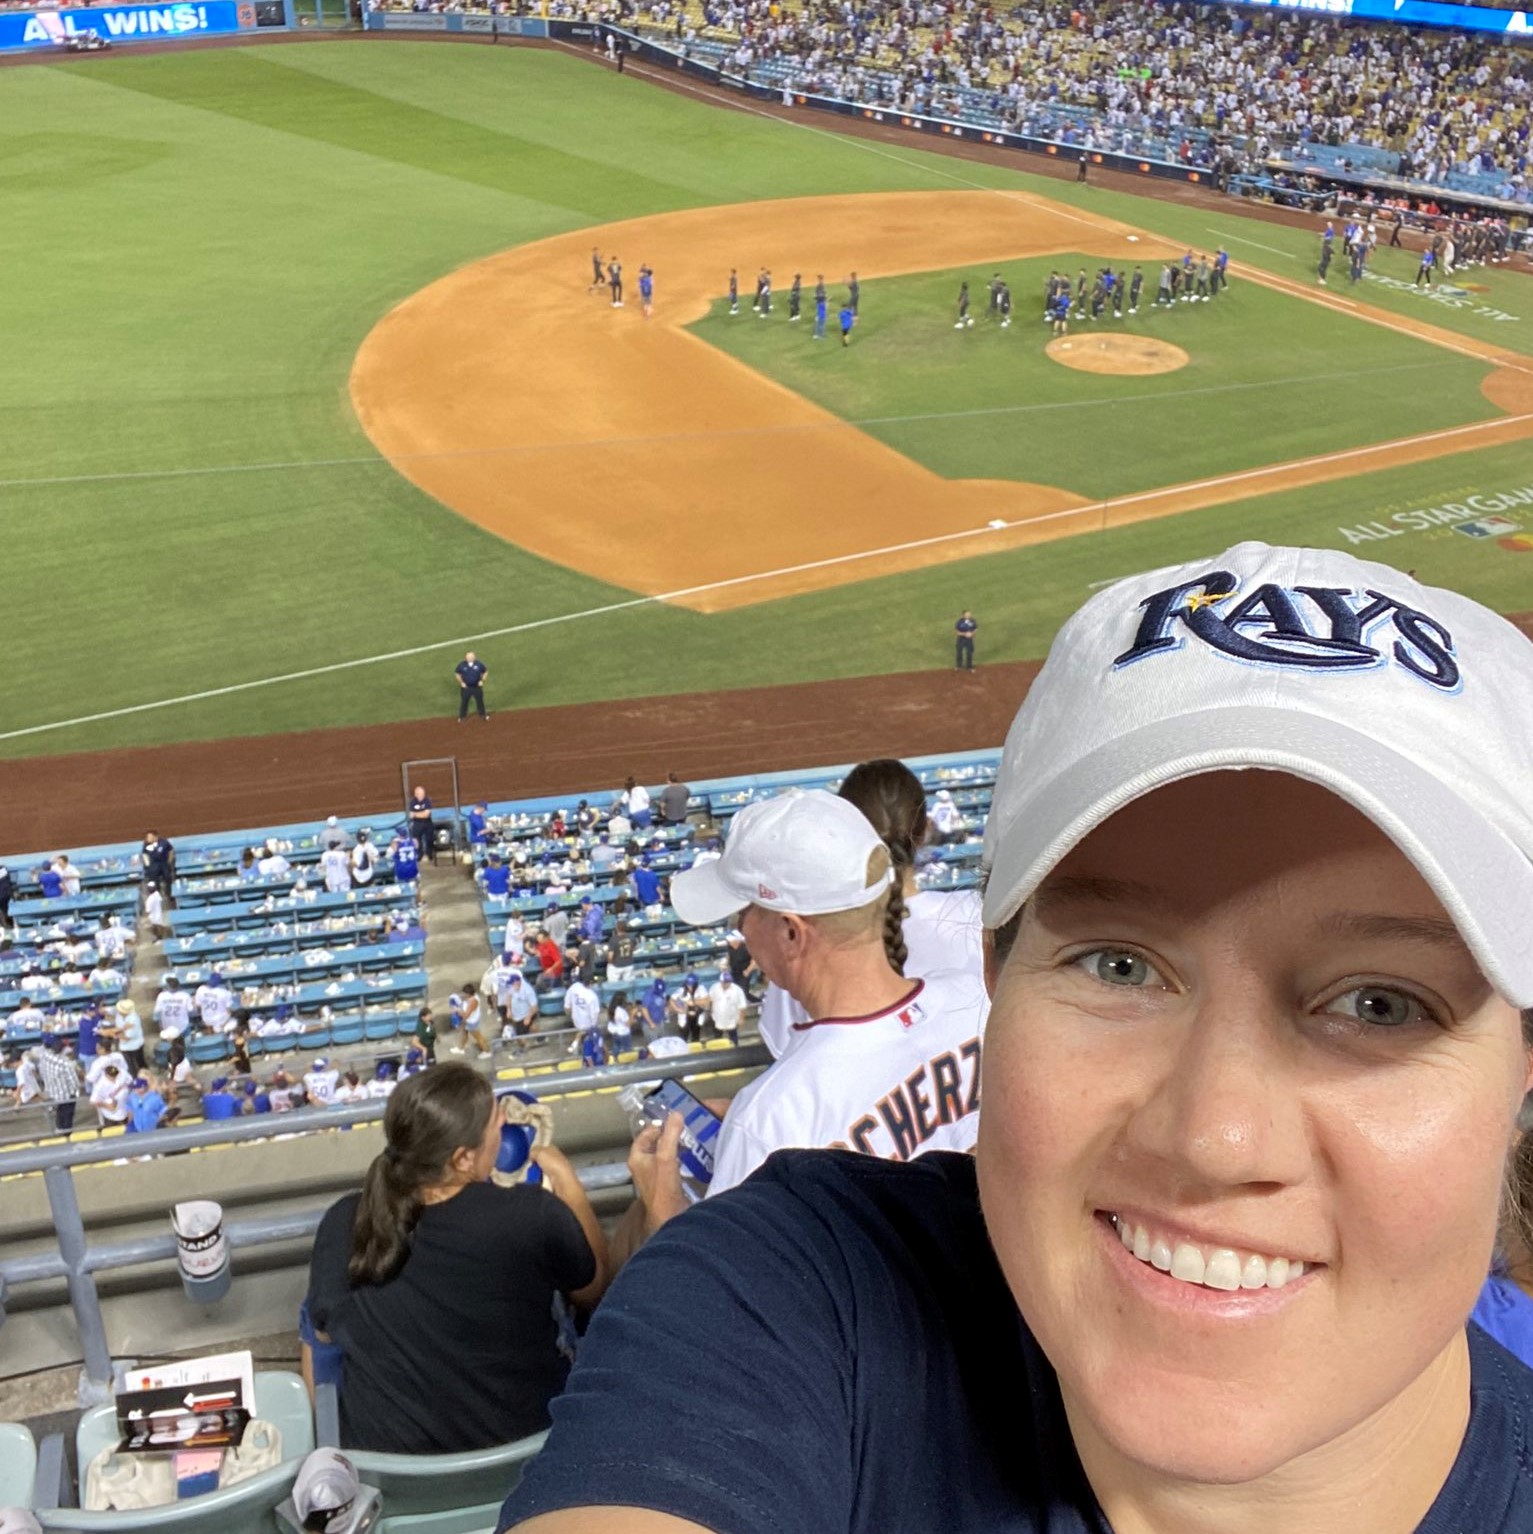 As a Japanese diplomat, I thank the Rays for celebrating 150 years of Japanese  baseball